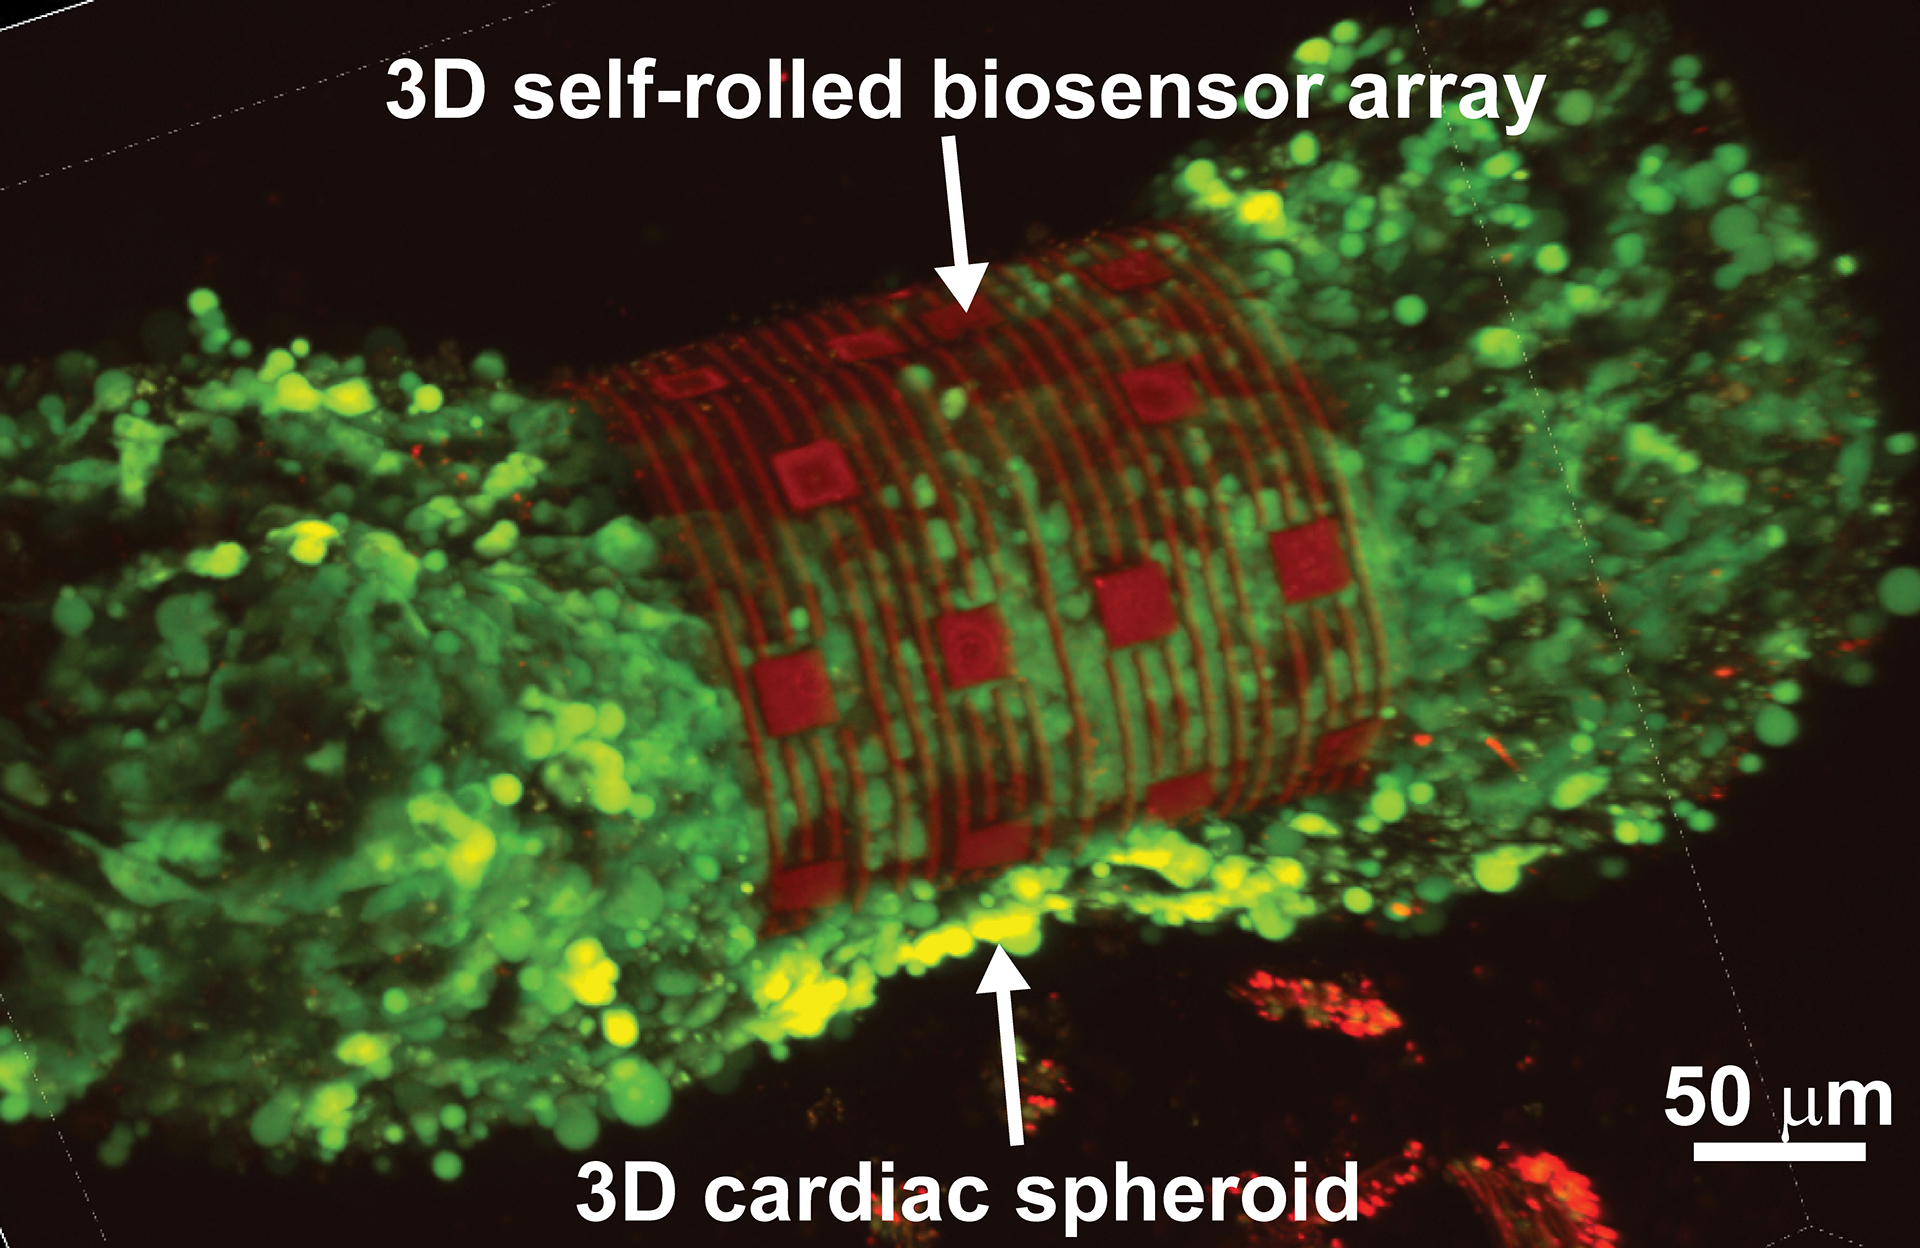 3D cardiac spheroid labeled with Ca2+ indicator dye encapsulated by the self-rolling sensor array.